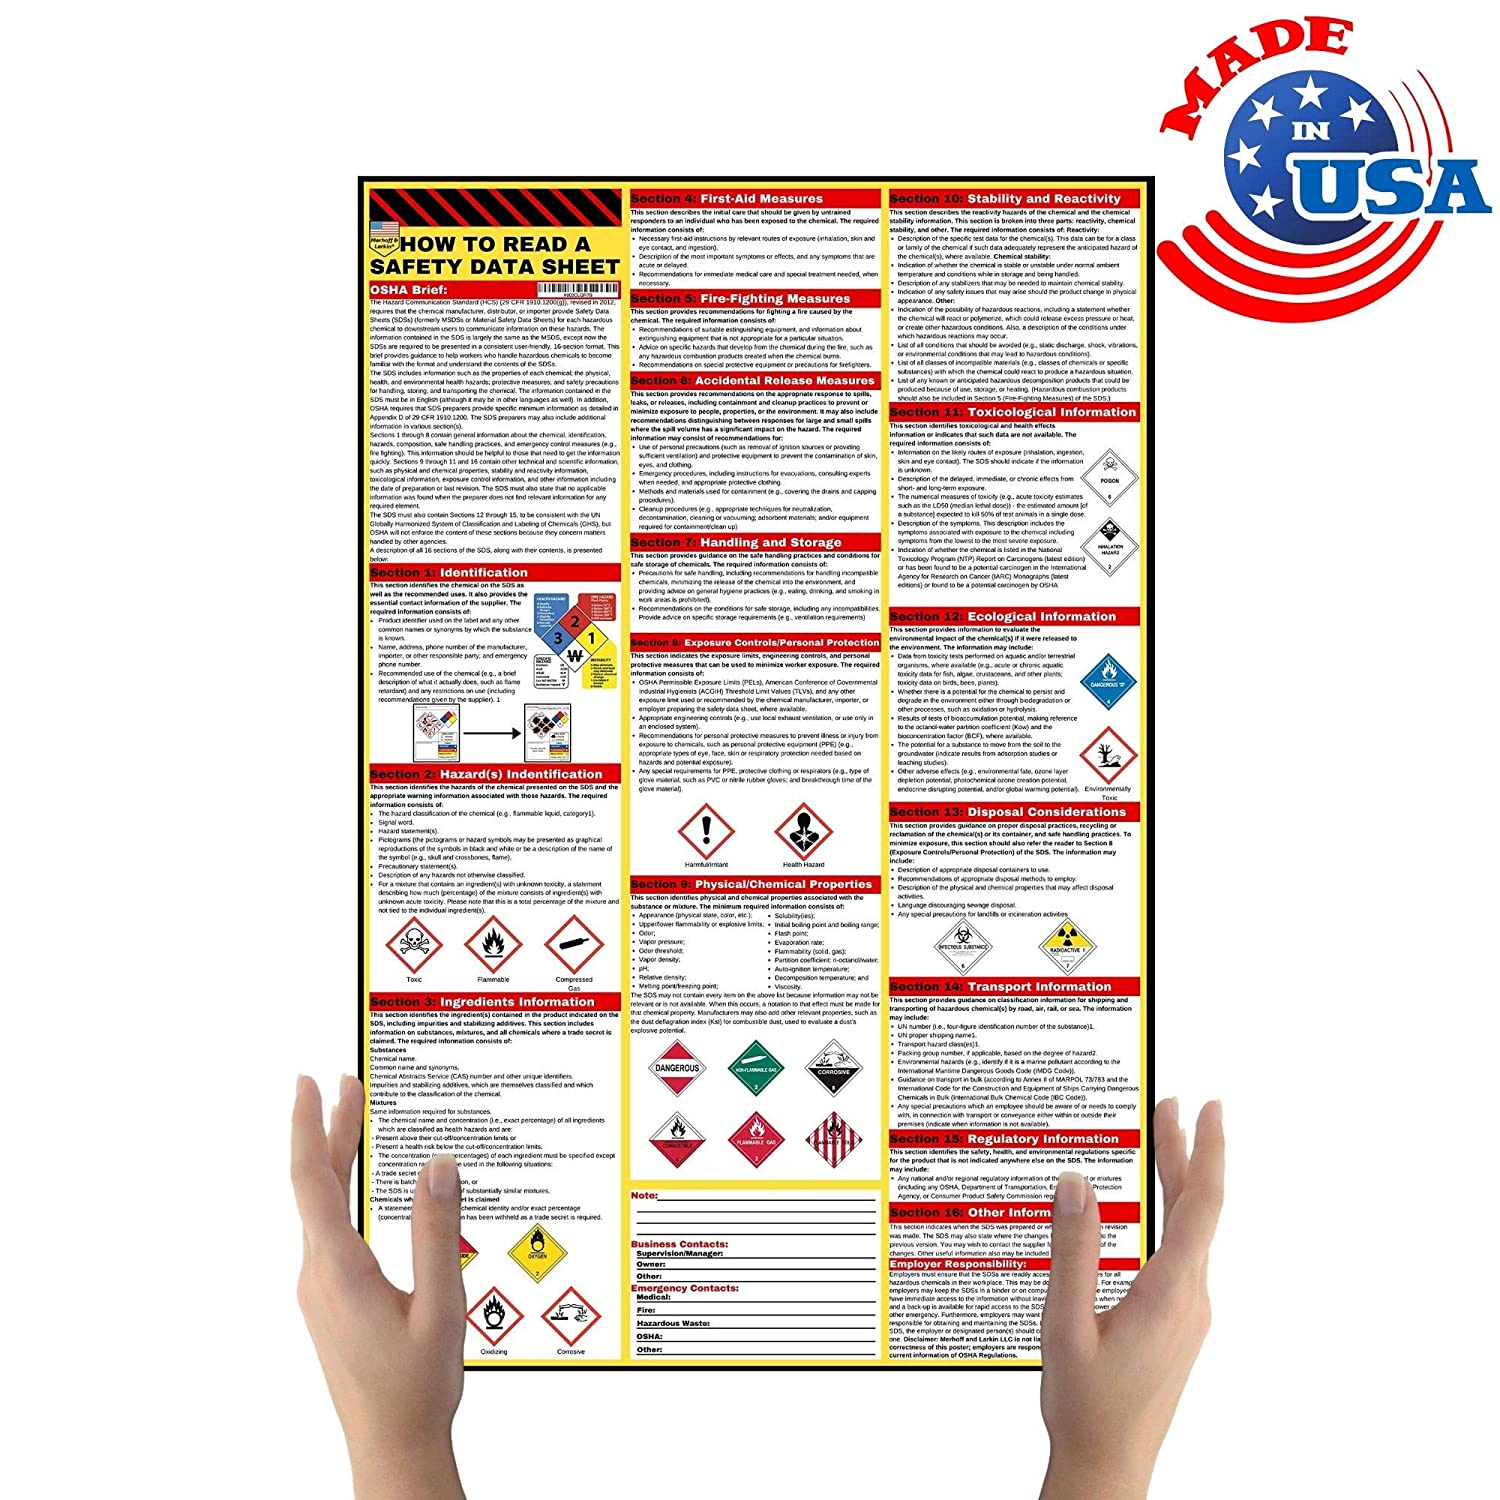  How To Read A Safety Data Sheet Poster